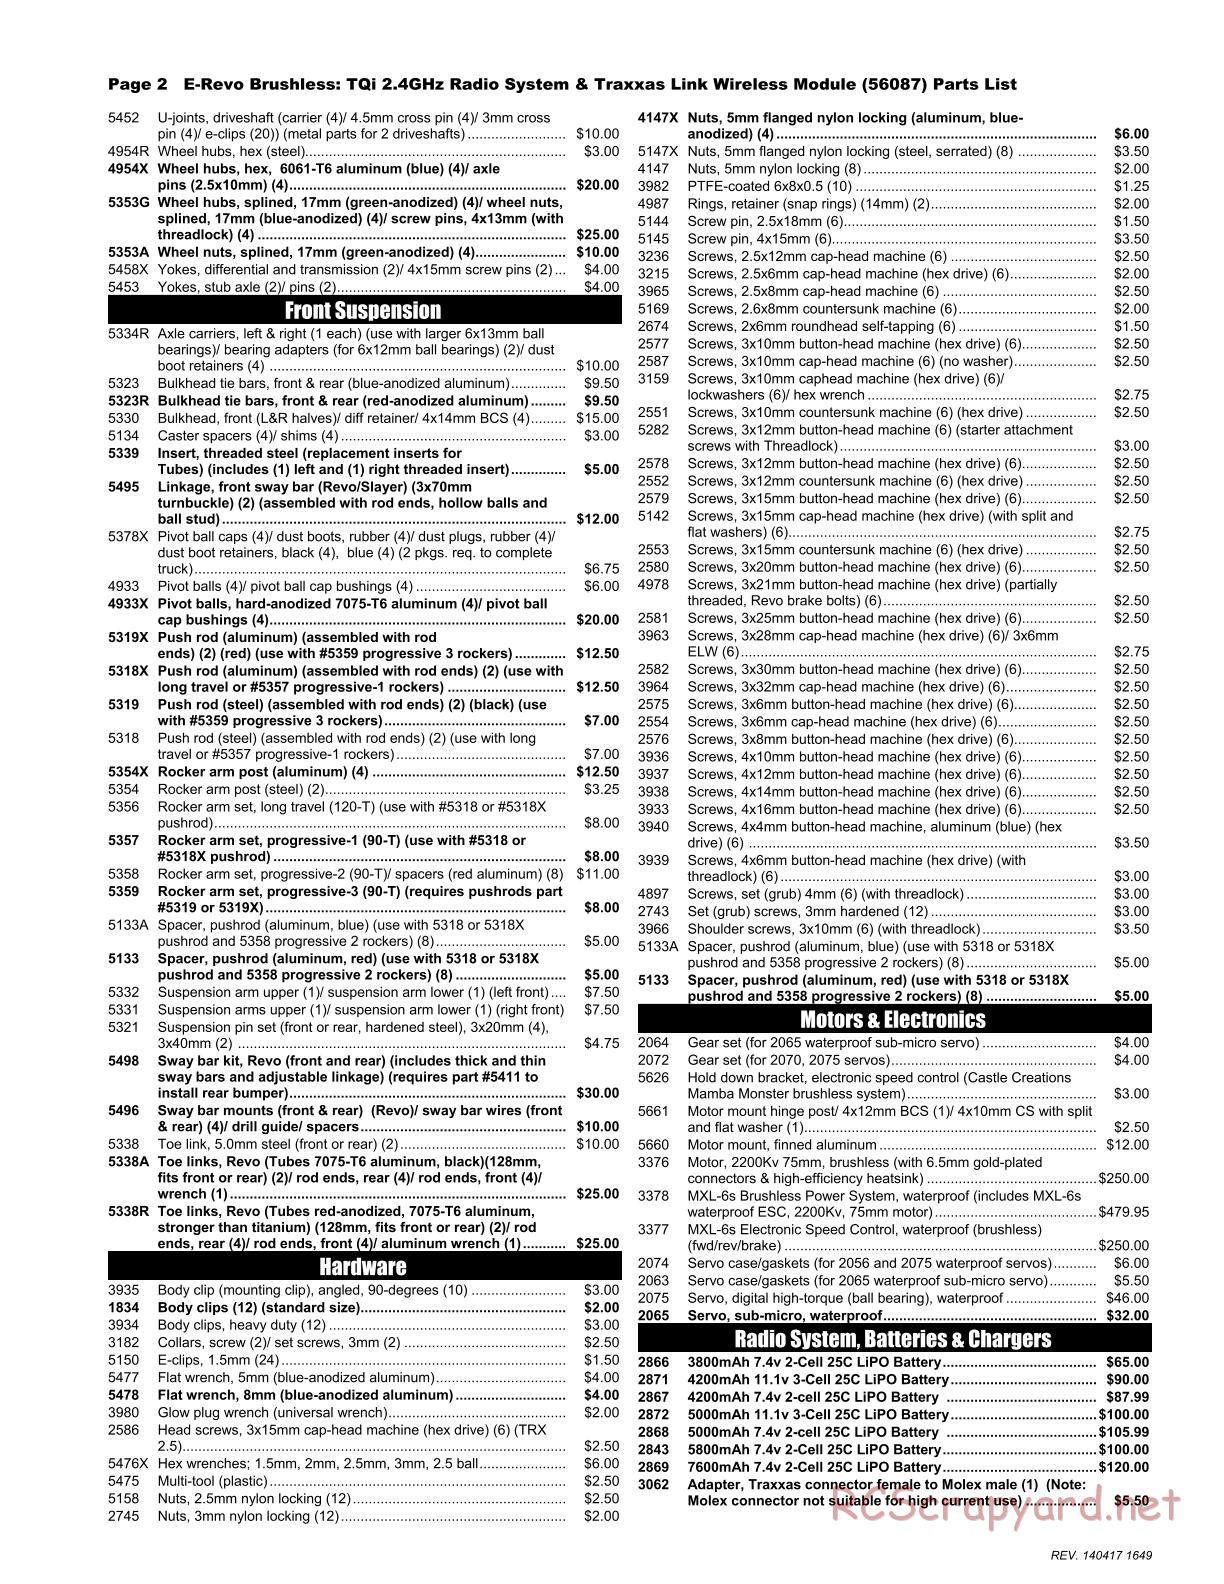 Traxxas - E-Revo Brushless (2014) - Parts List - Page 2